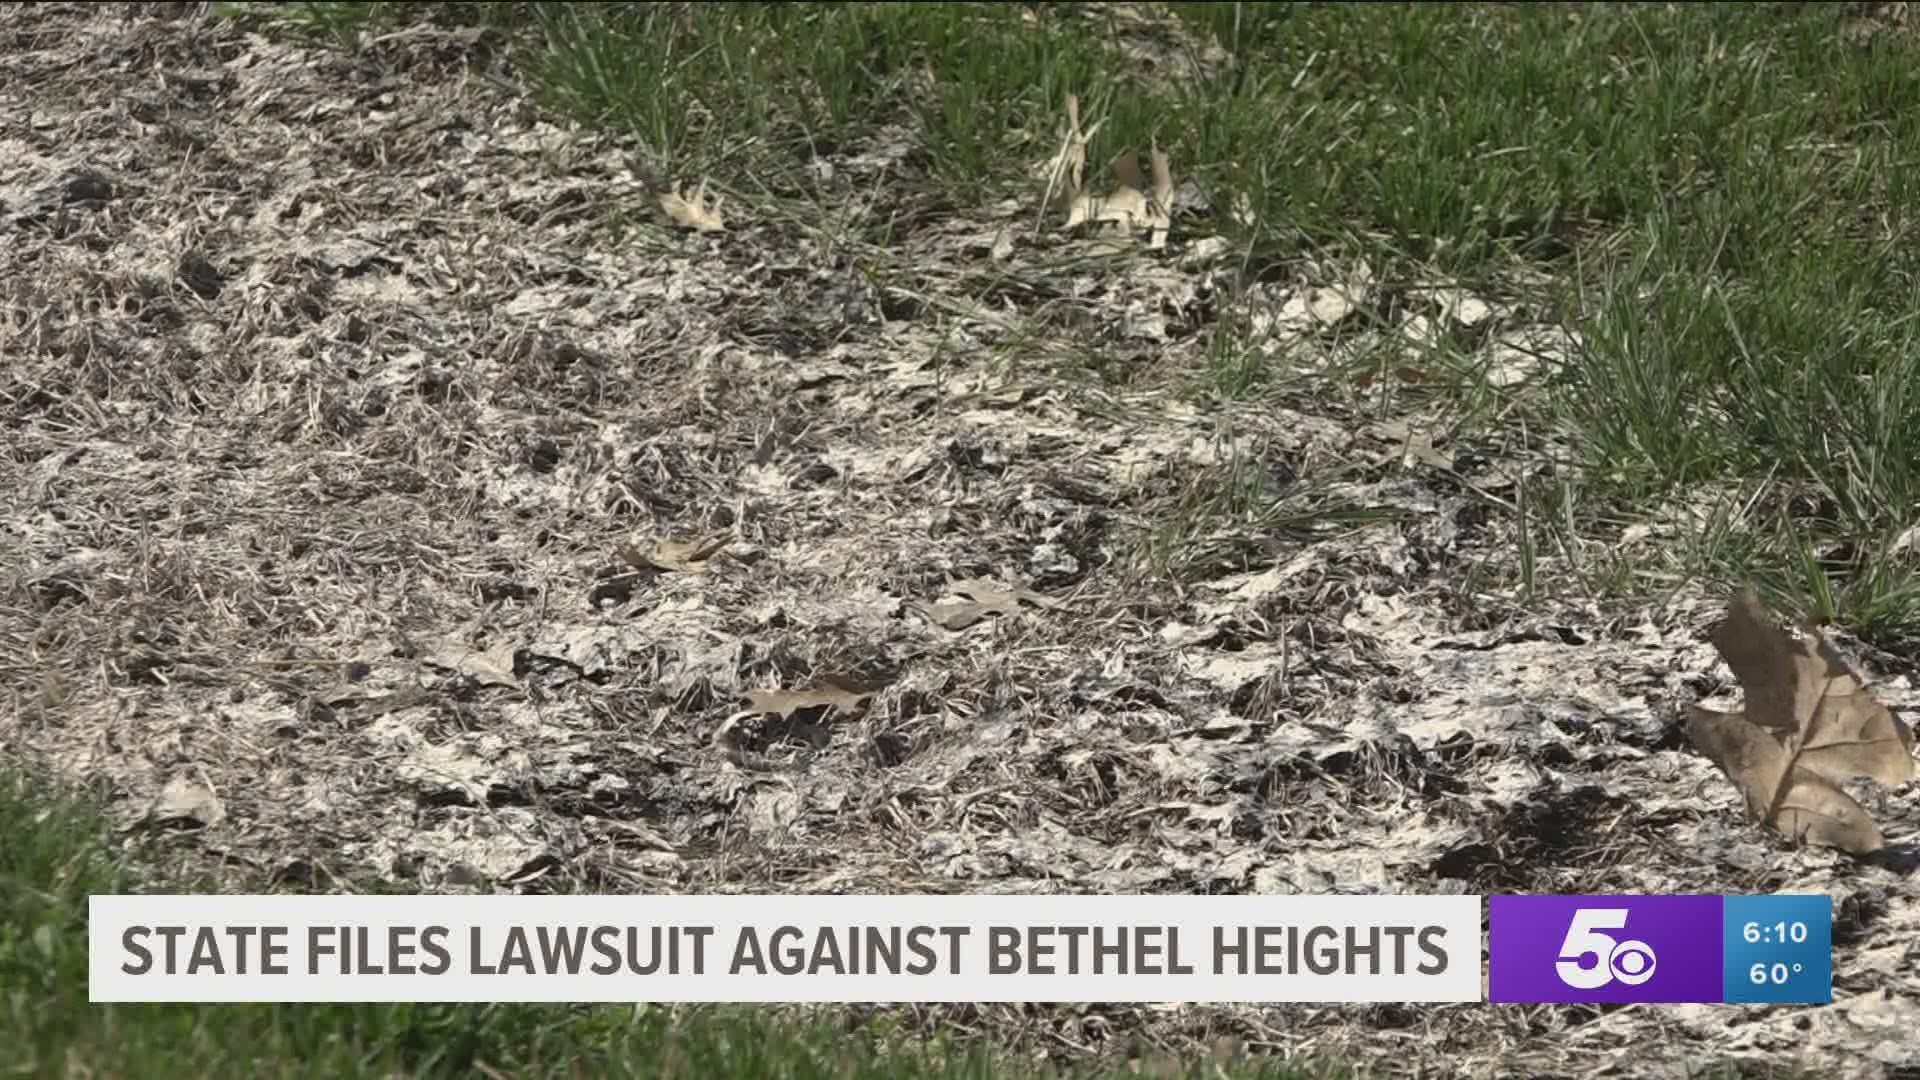 State files lawsuit against Bethel Heights